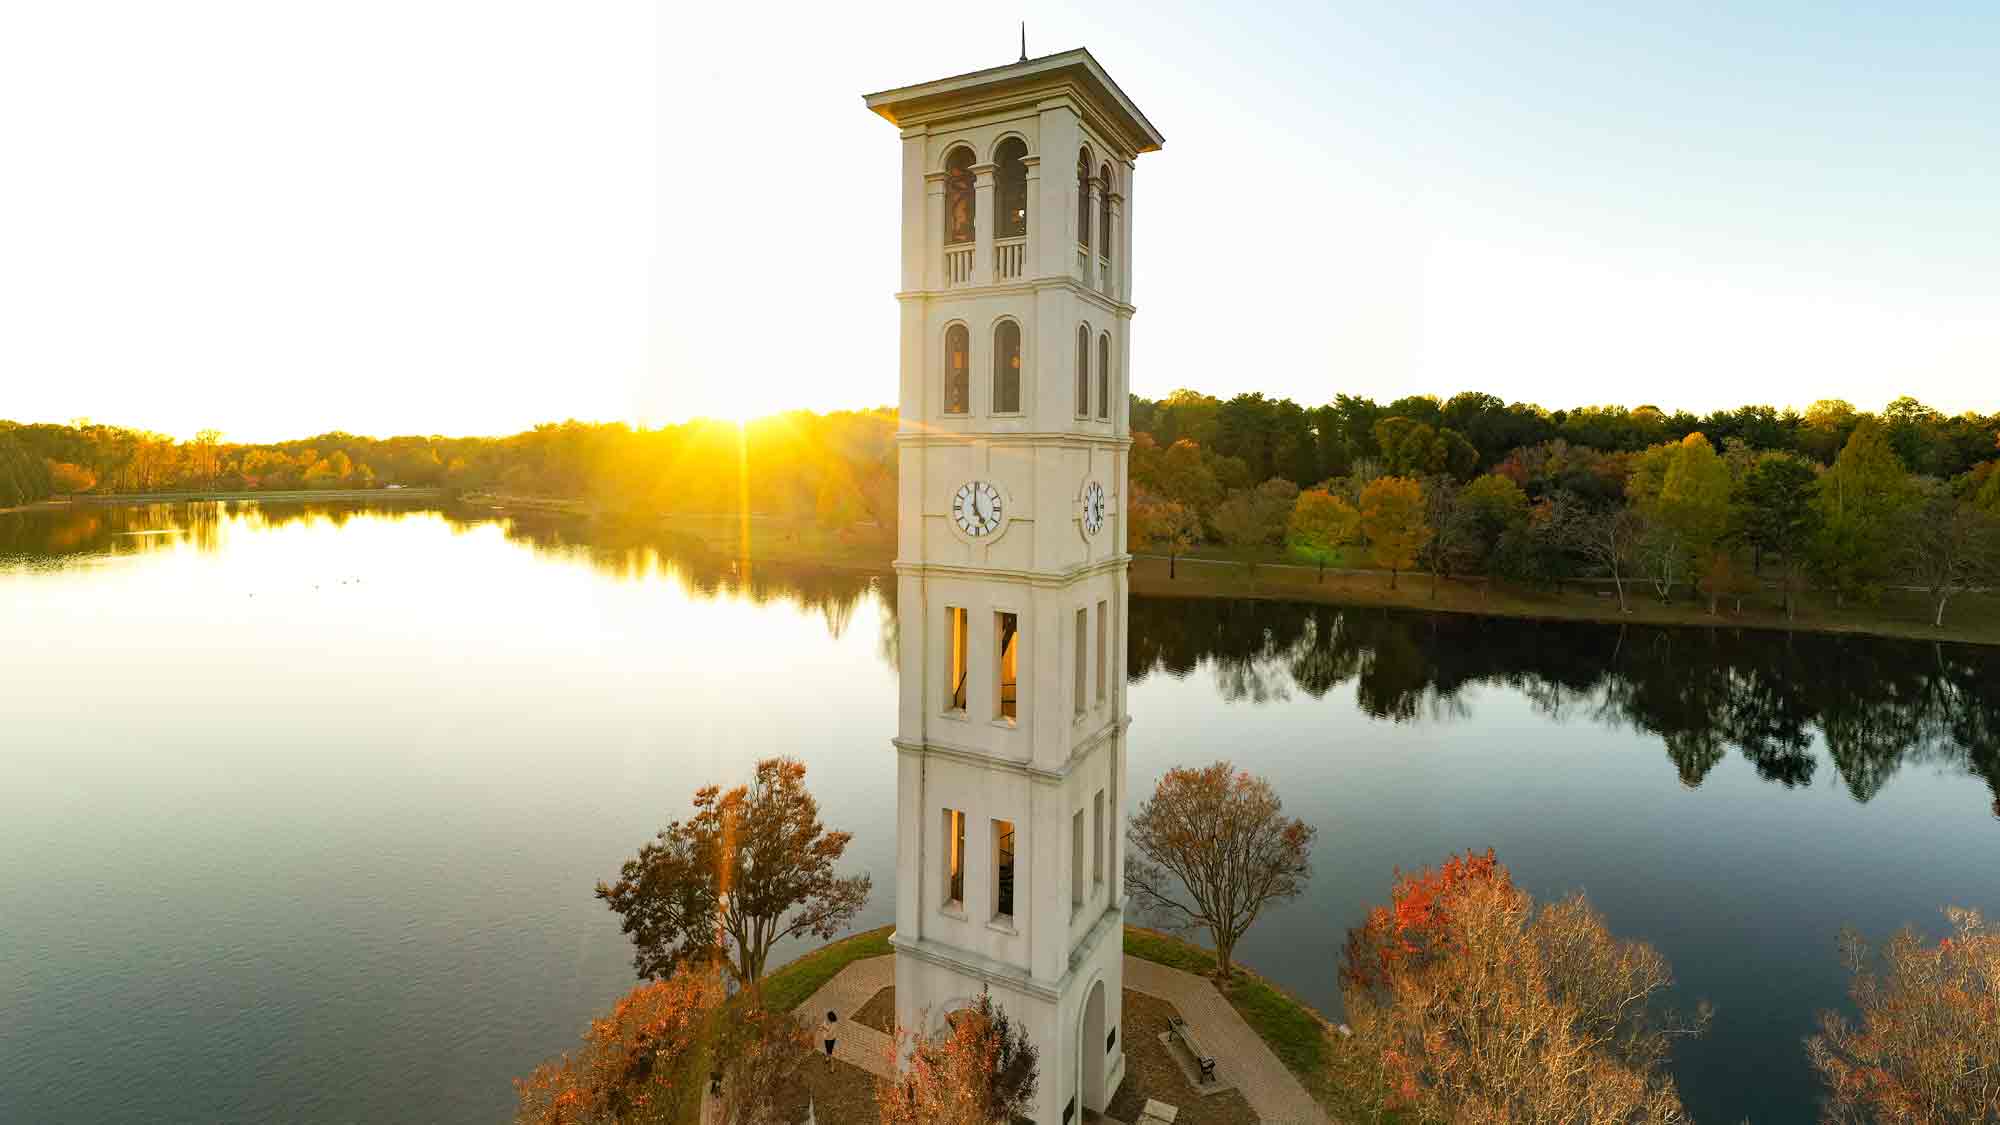 Bell tower in autumnal landscape